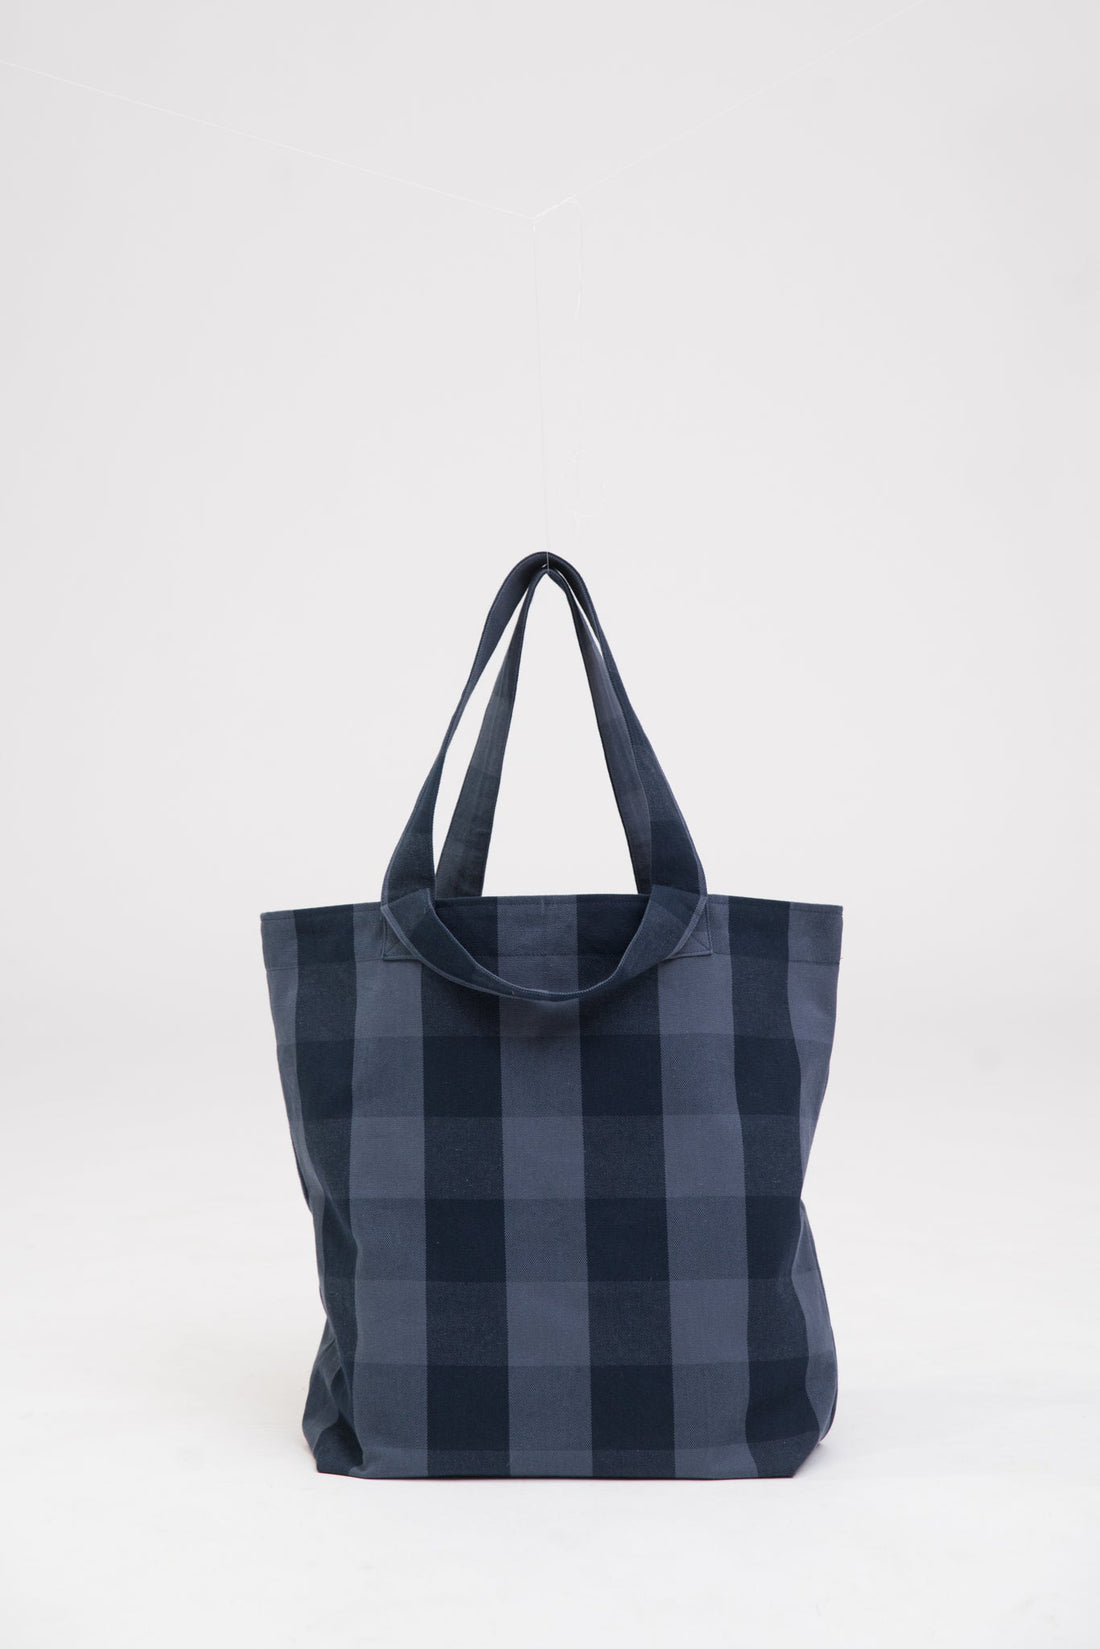 A blue checked tote bag